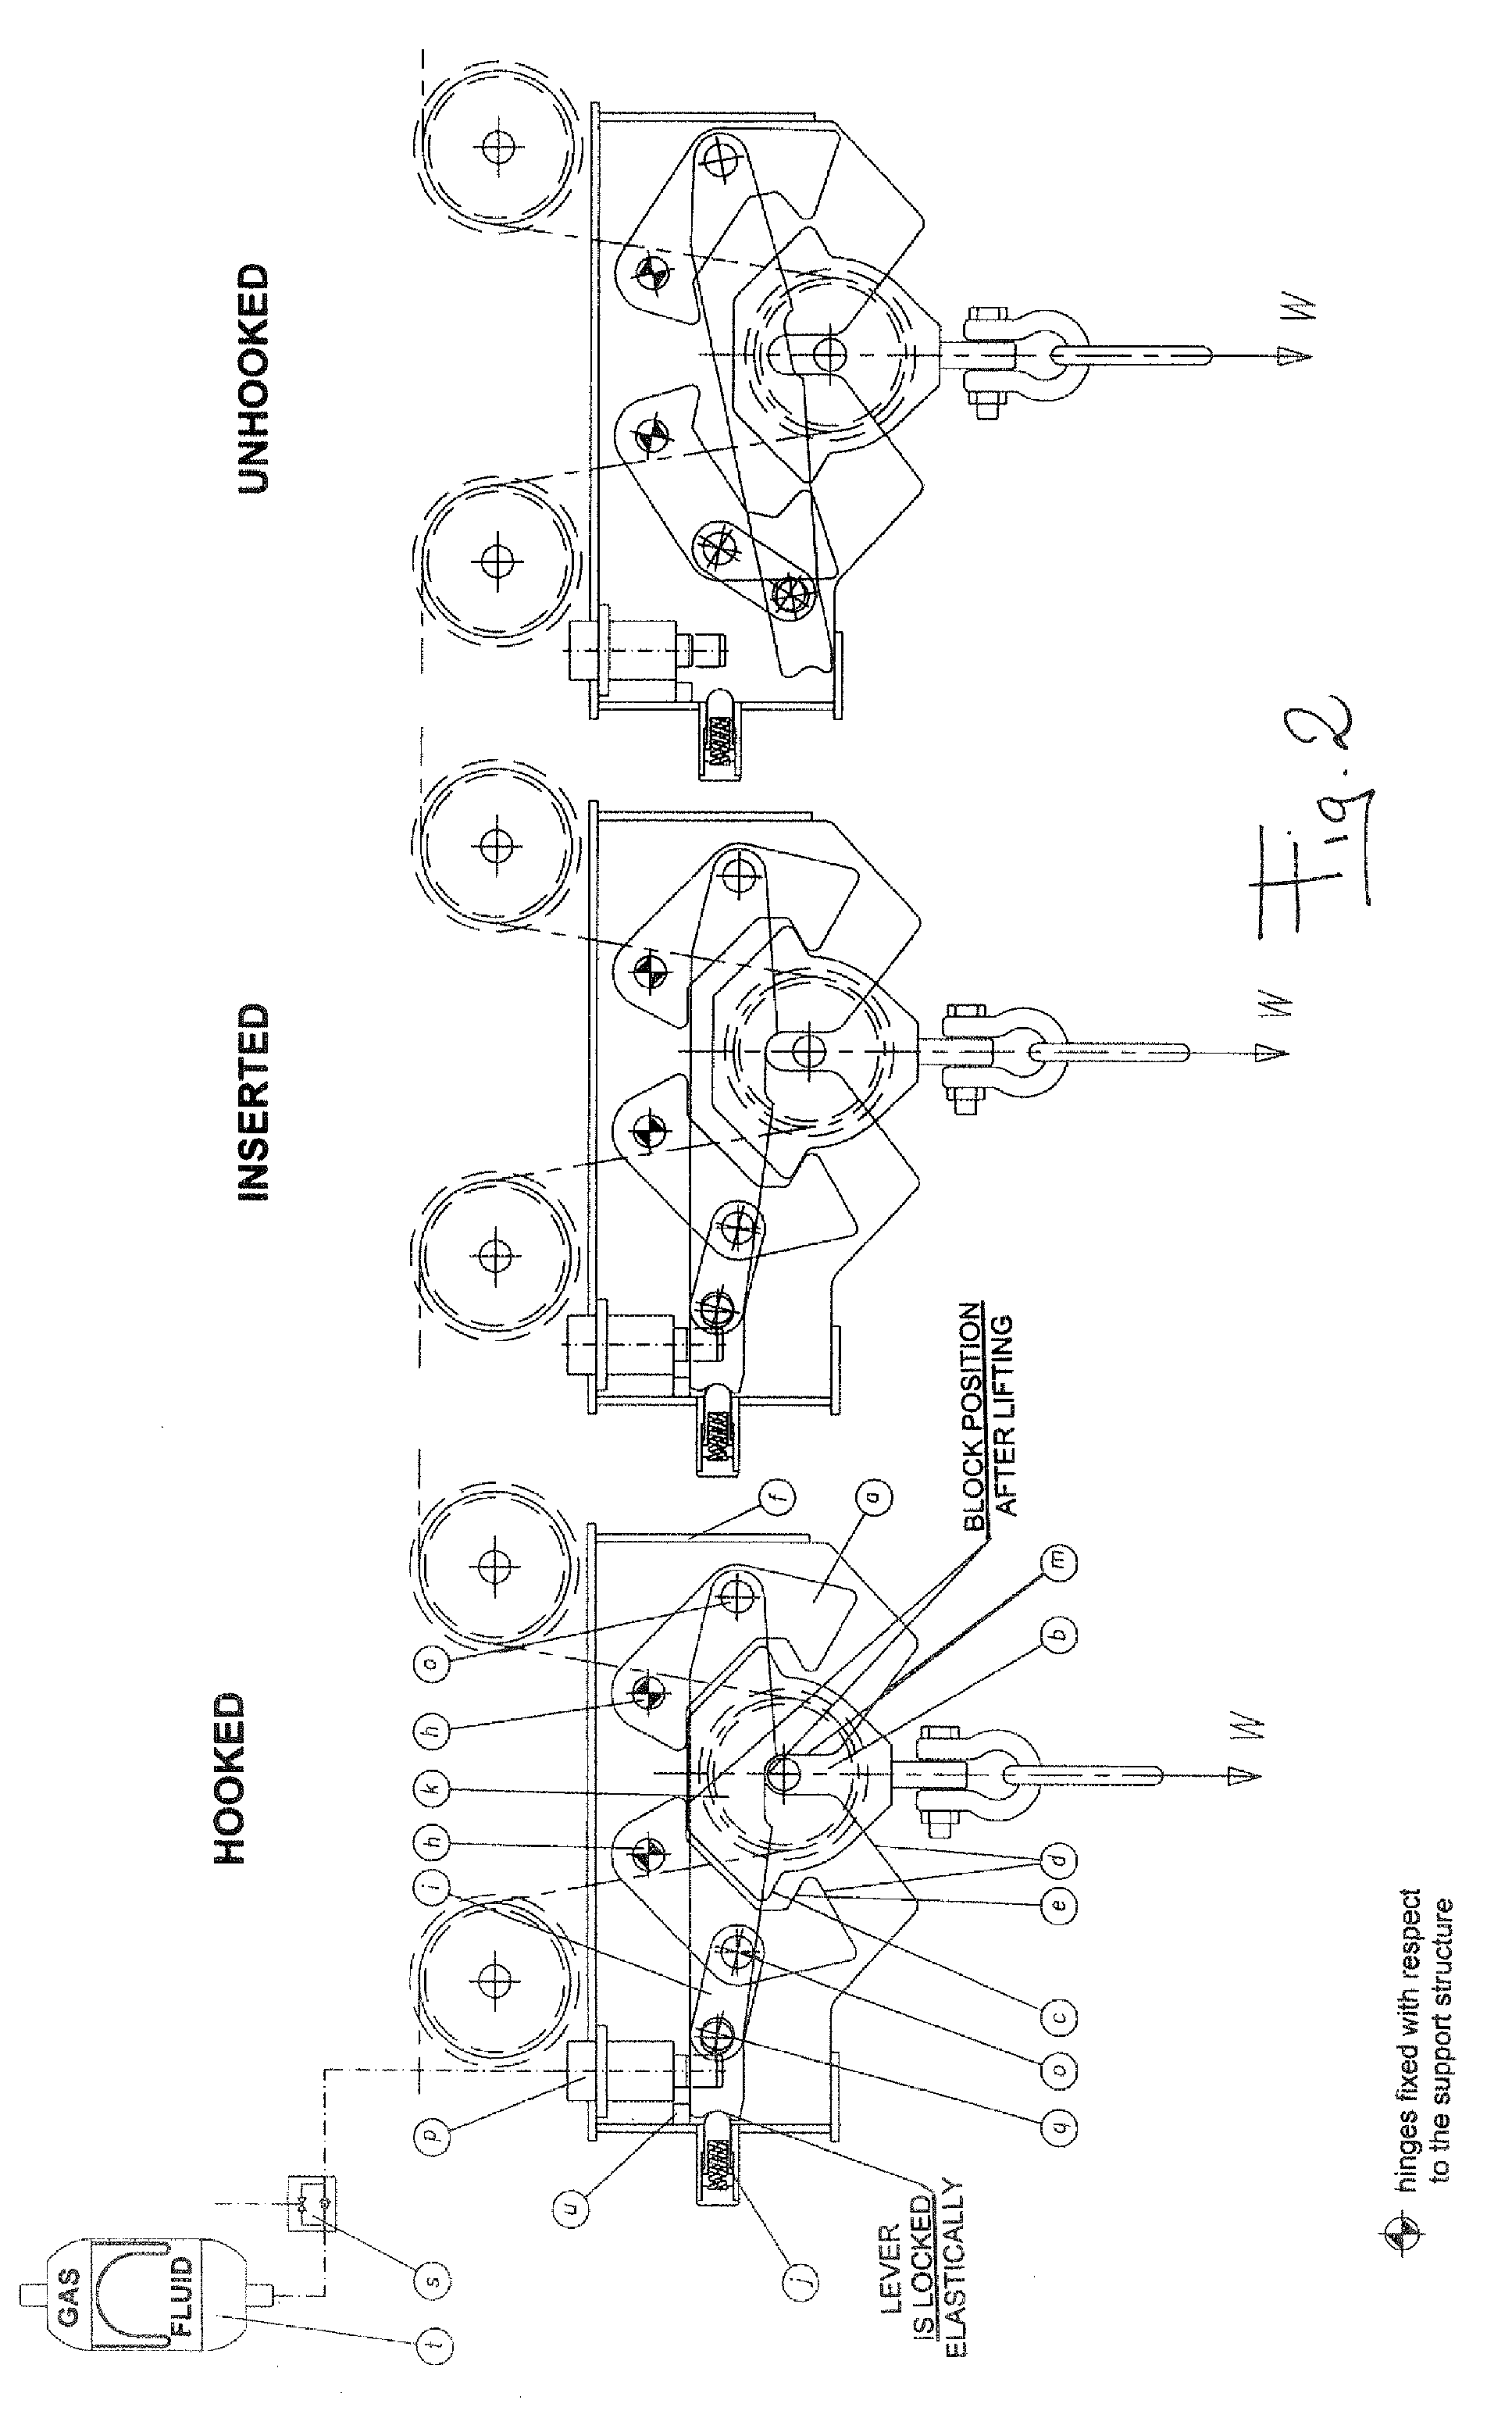 Automatic Hooking Device And Controlled Release Of Loaded Blocks